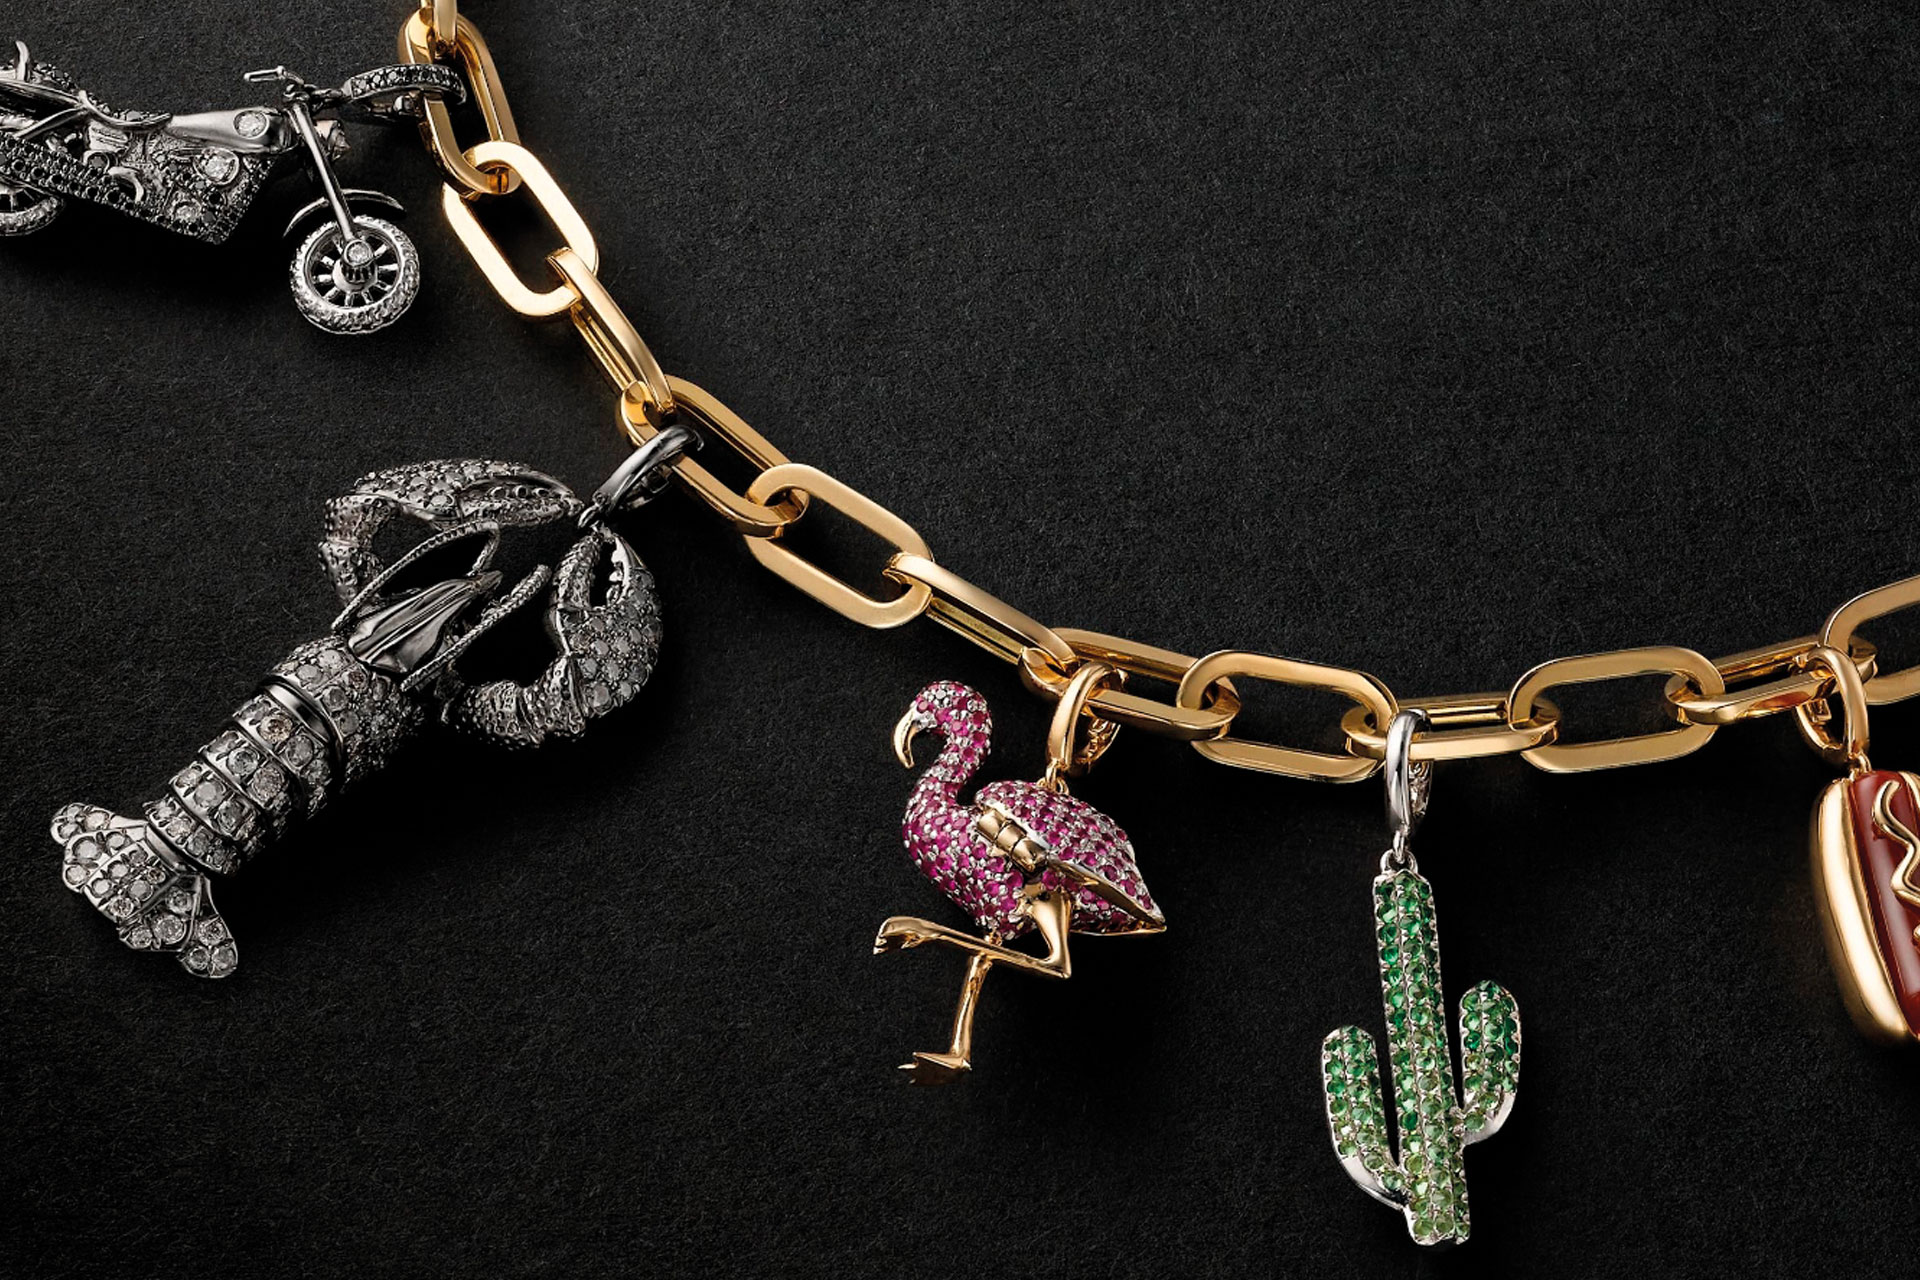 Annoushka: The Inspired Jewellery Brand Taking A Mindful, Playful Approach